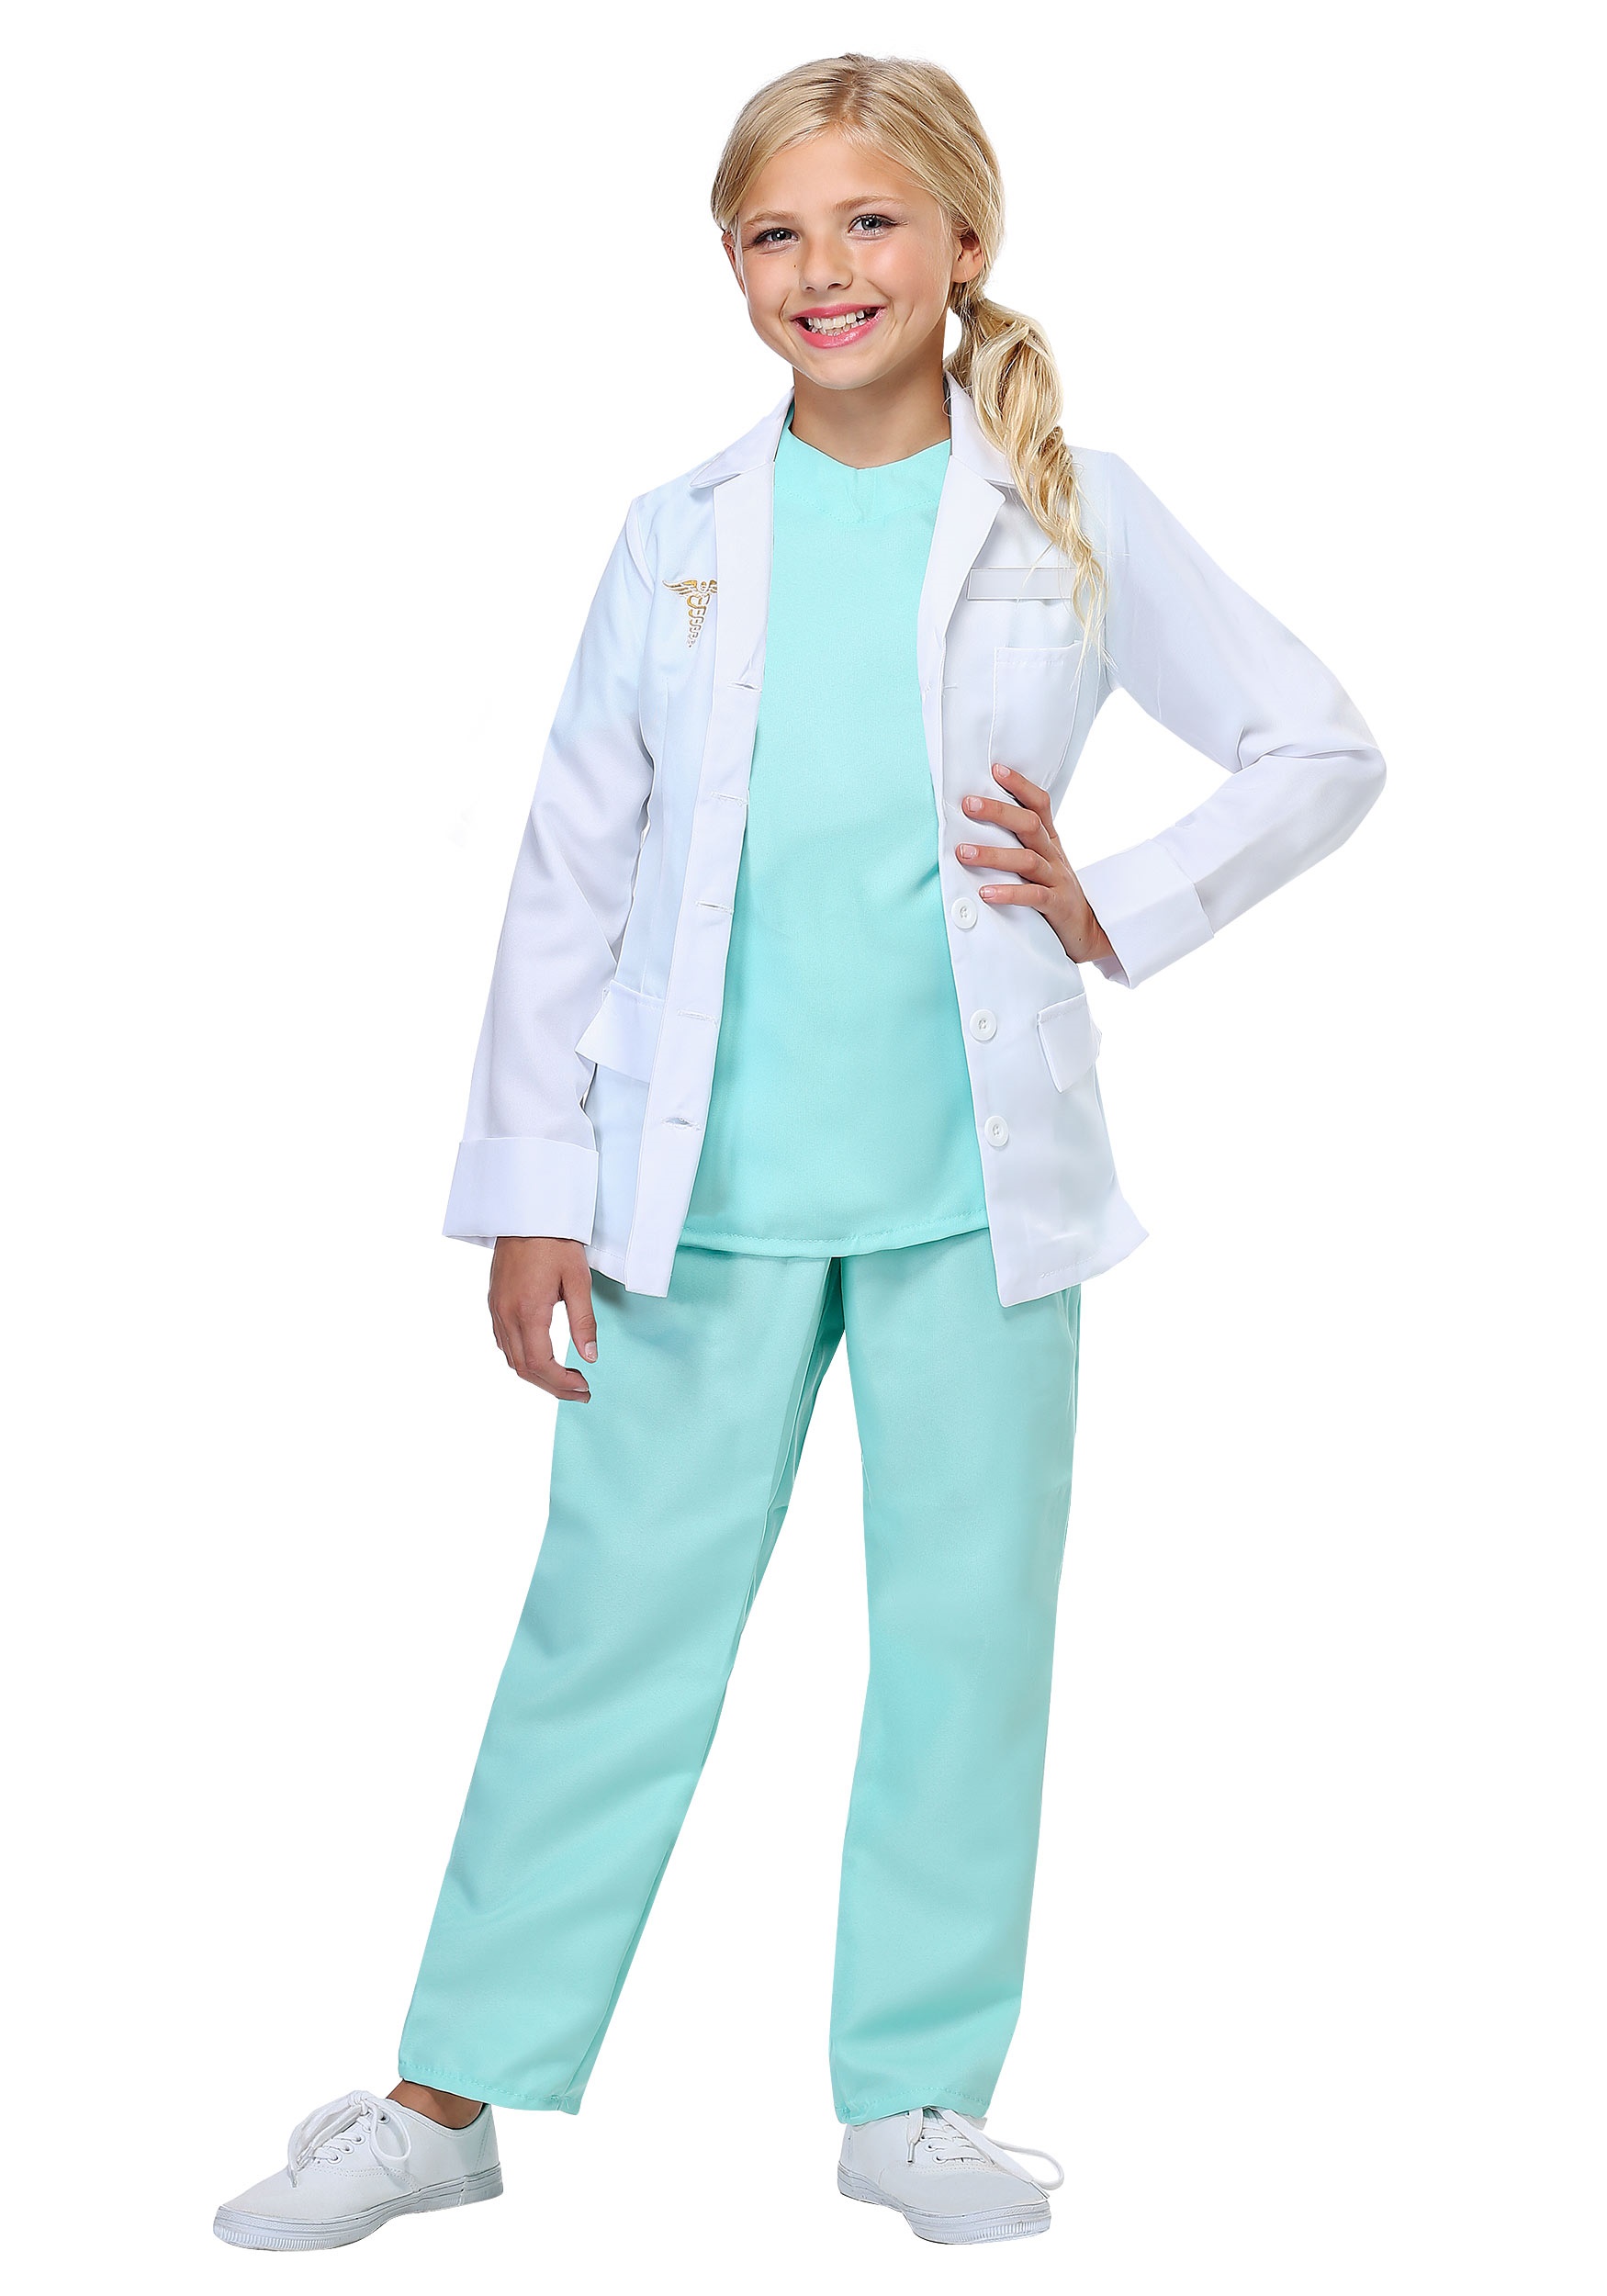 Doctor Costume for Kids